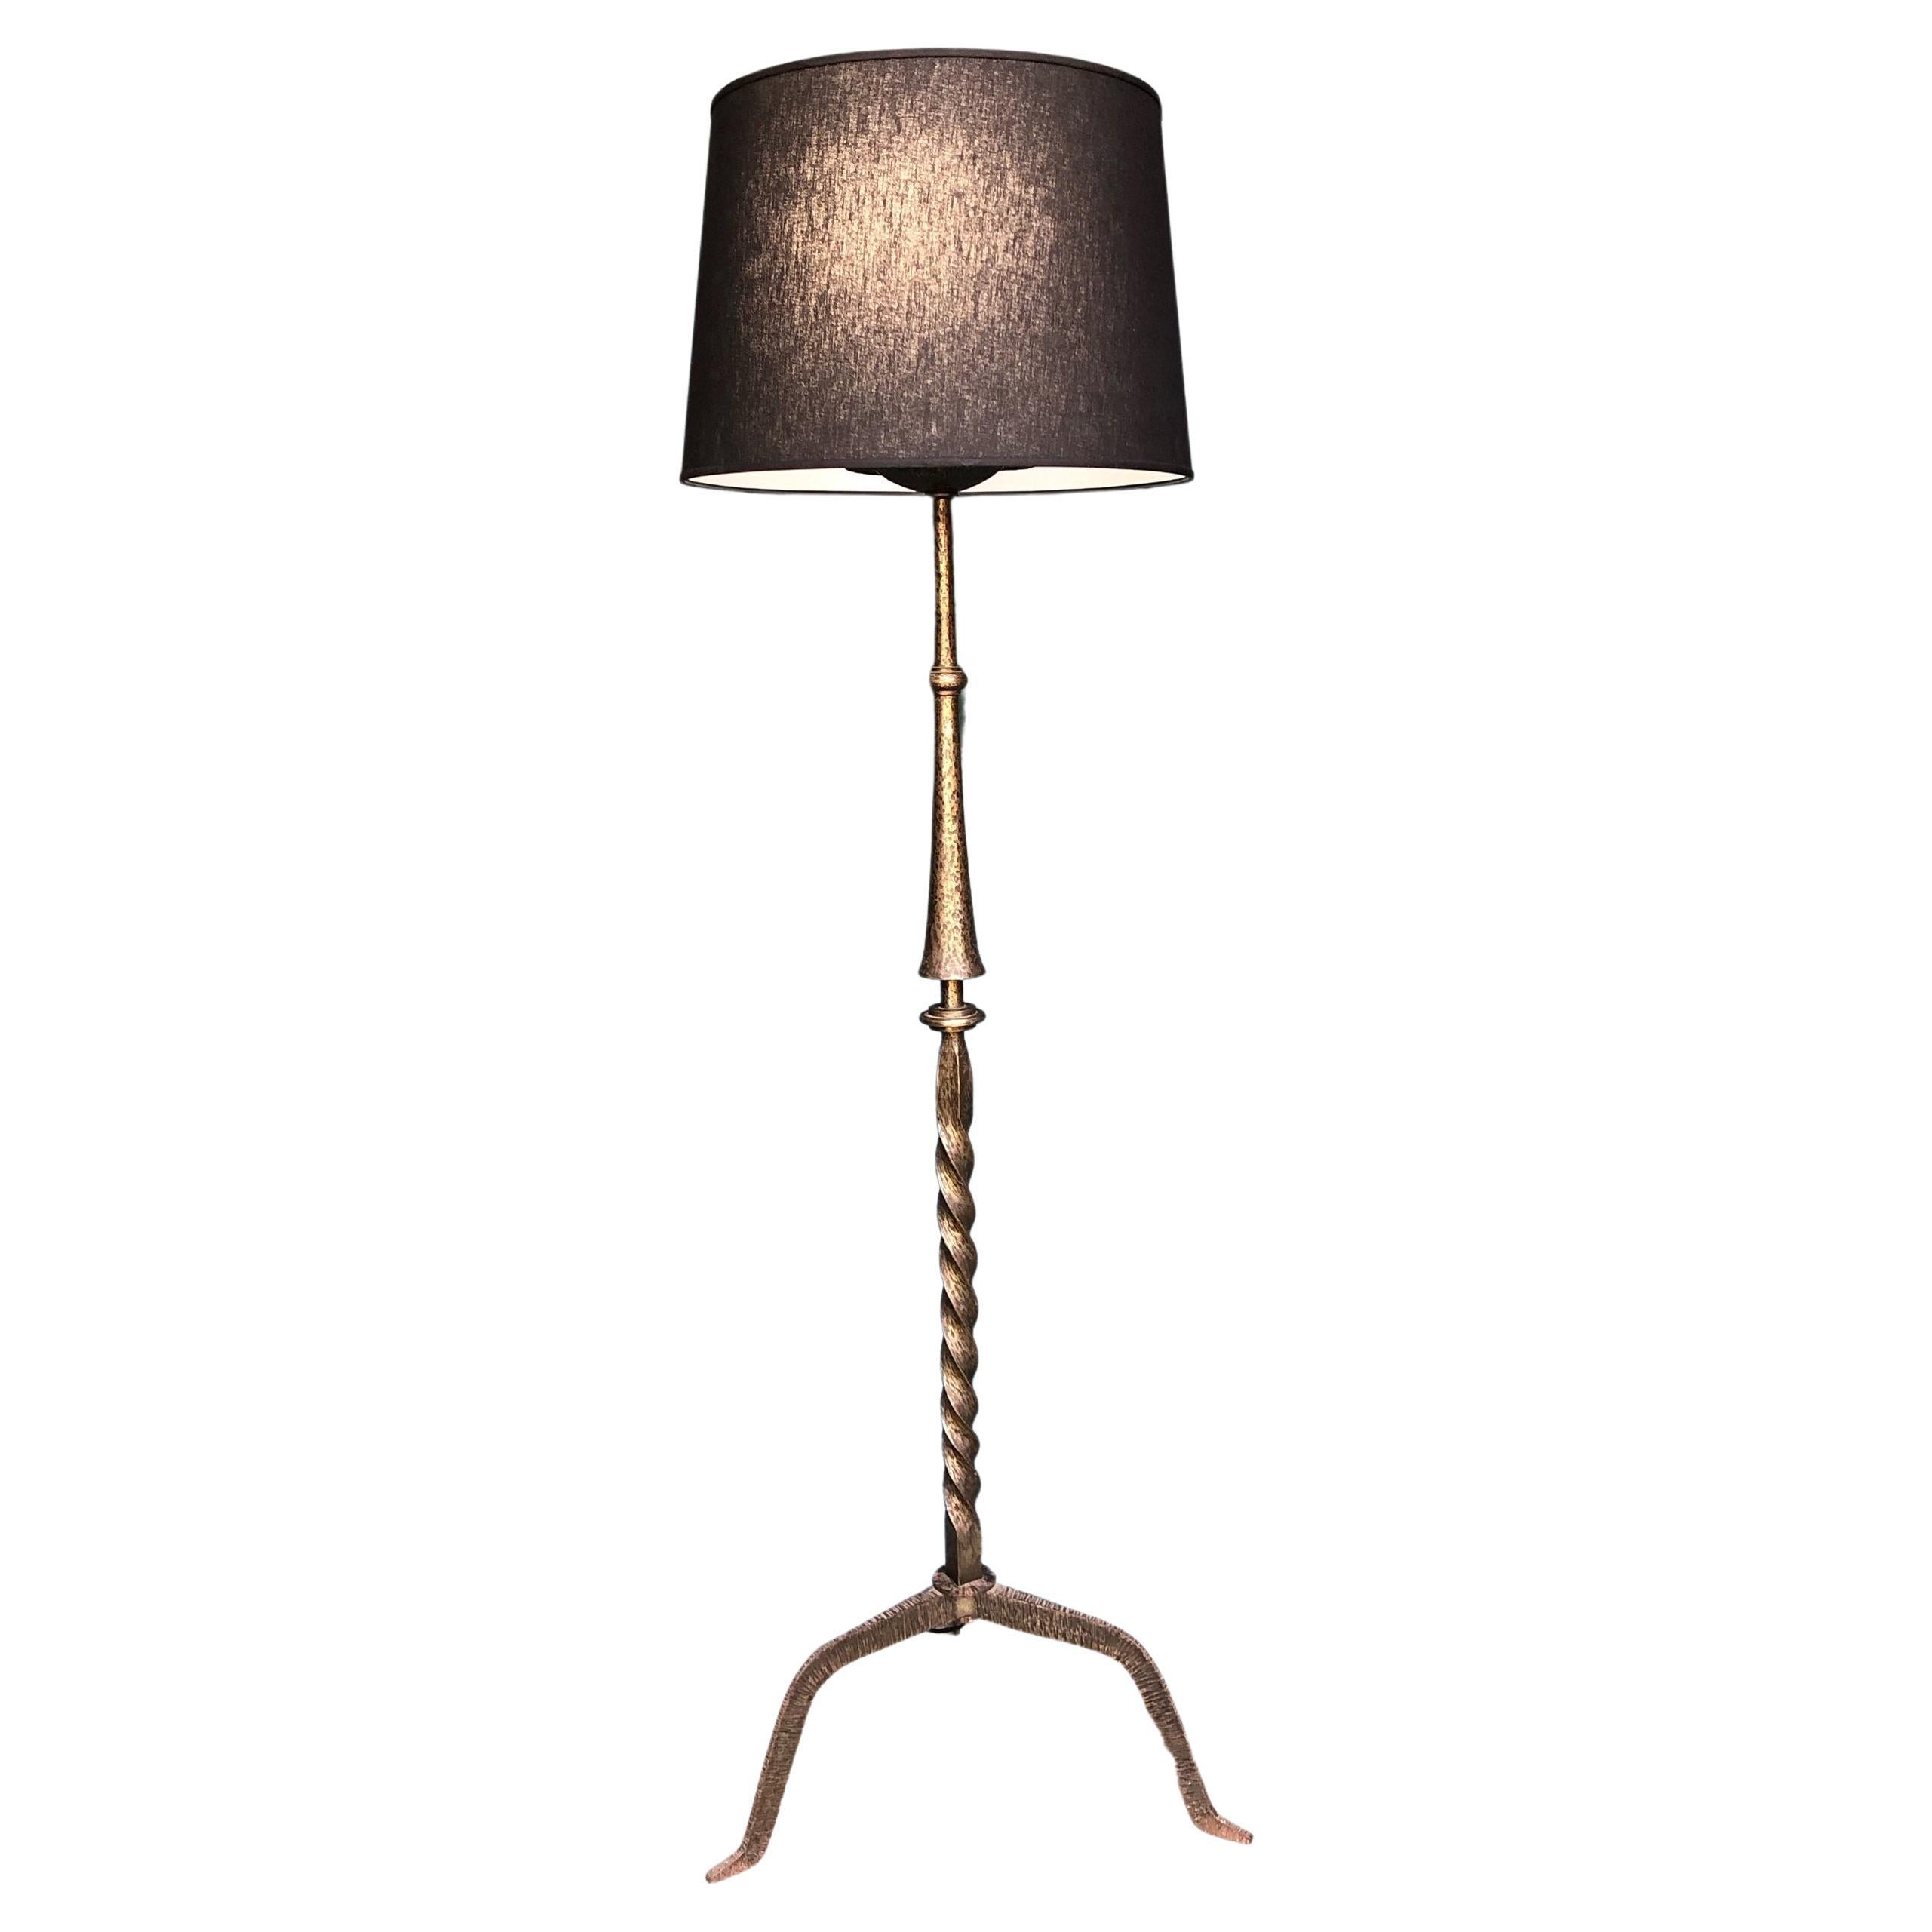 French 1950s Modernist Iron Floor Lamp For Sale